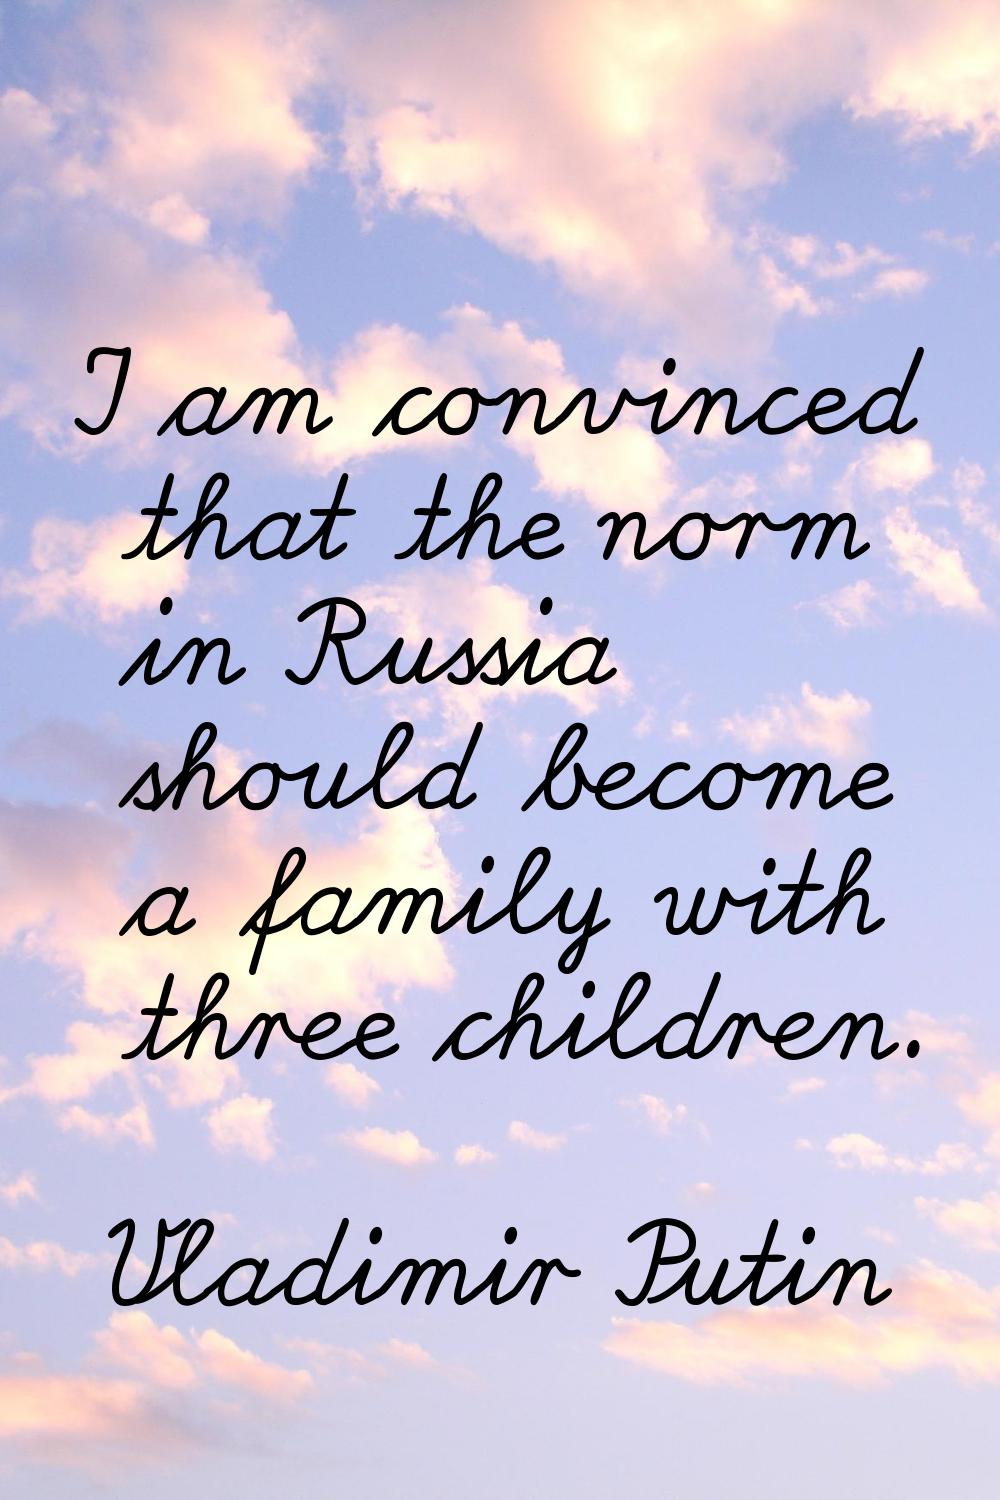 I am convinced that the norm in Russia should become a family with three children.